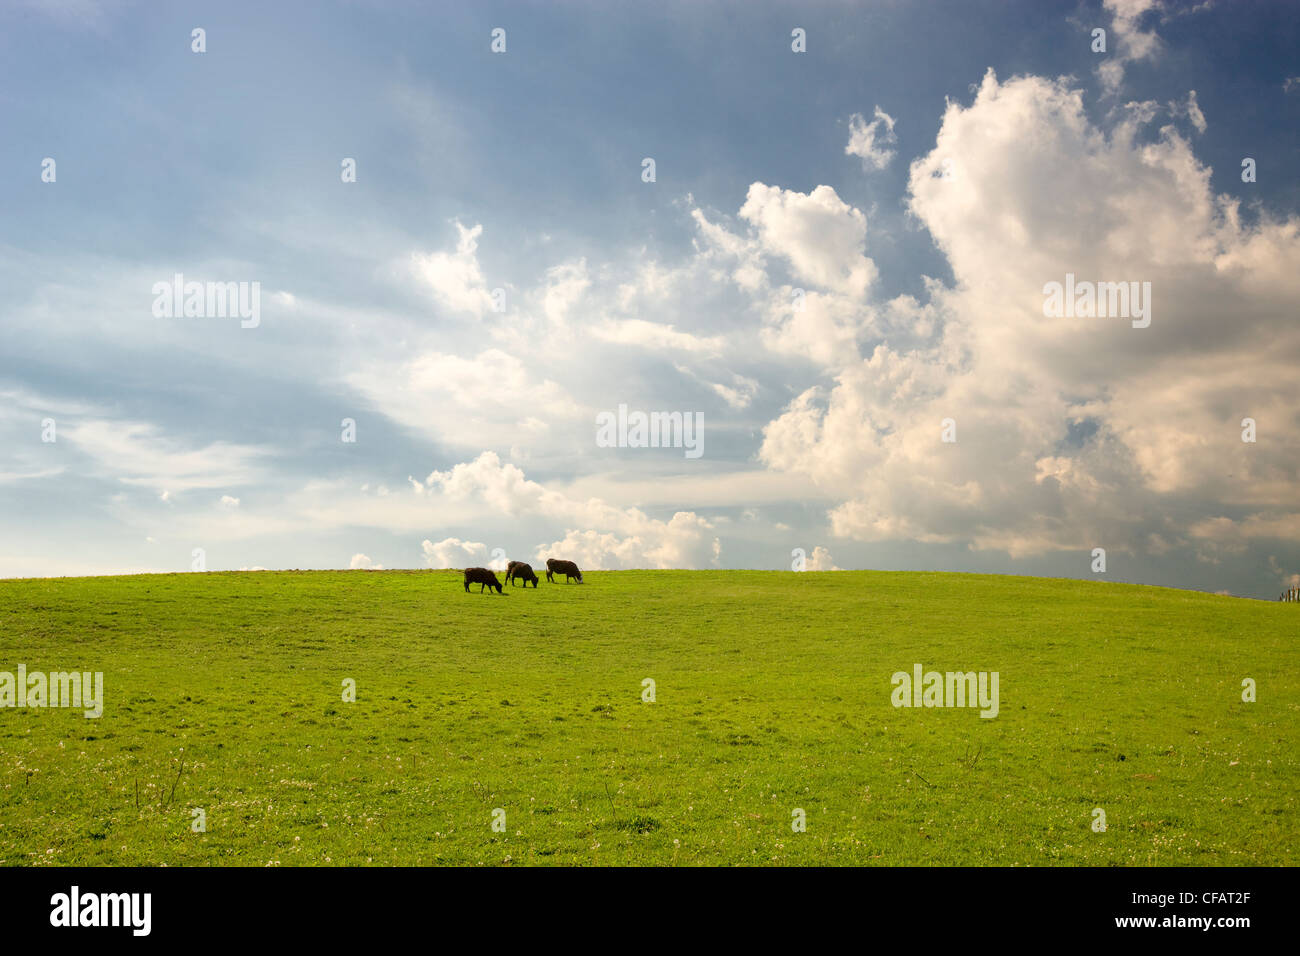 Cattle grazing in a field, Sidney, Ontario, Canada. Stock Photo